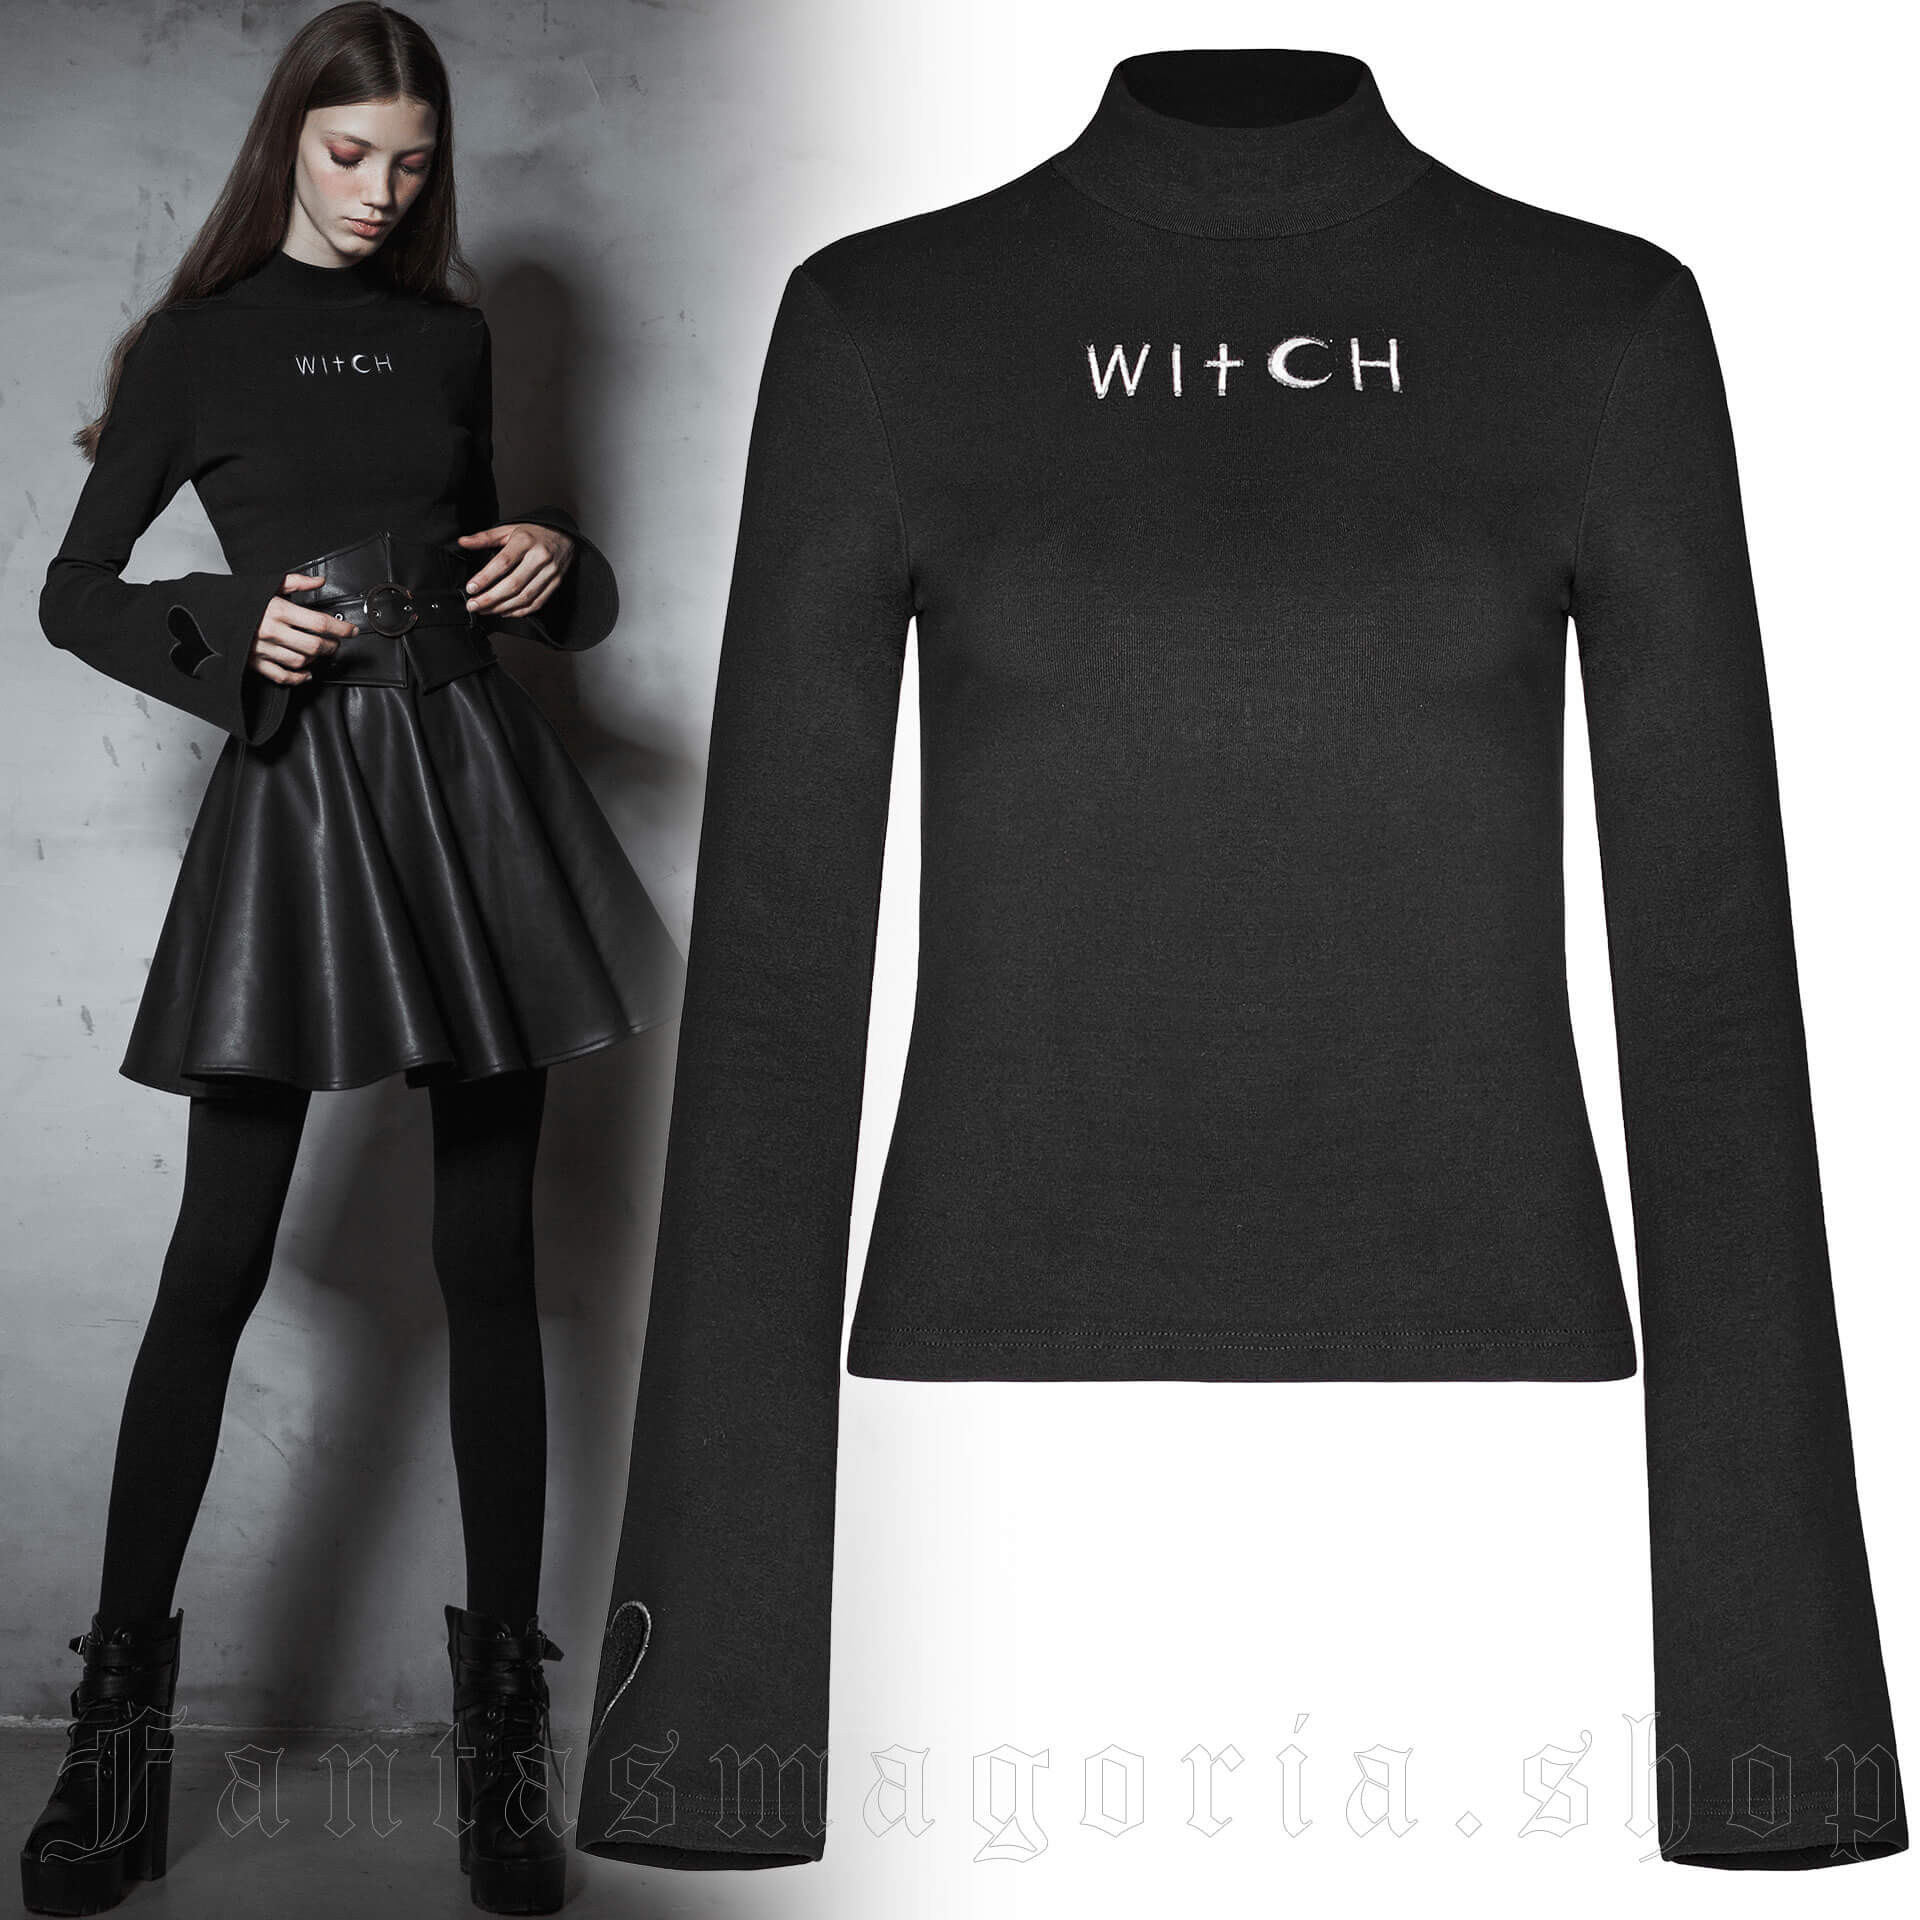 Witch Top - Punk Rave - OPT-293 1